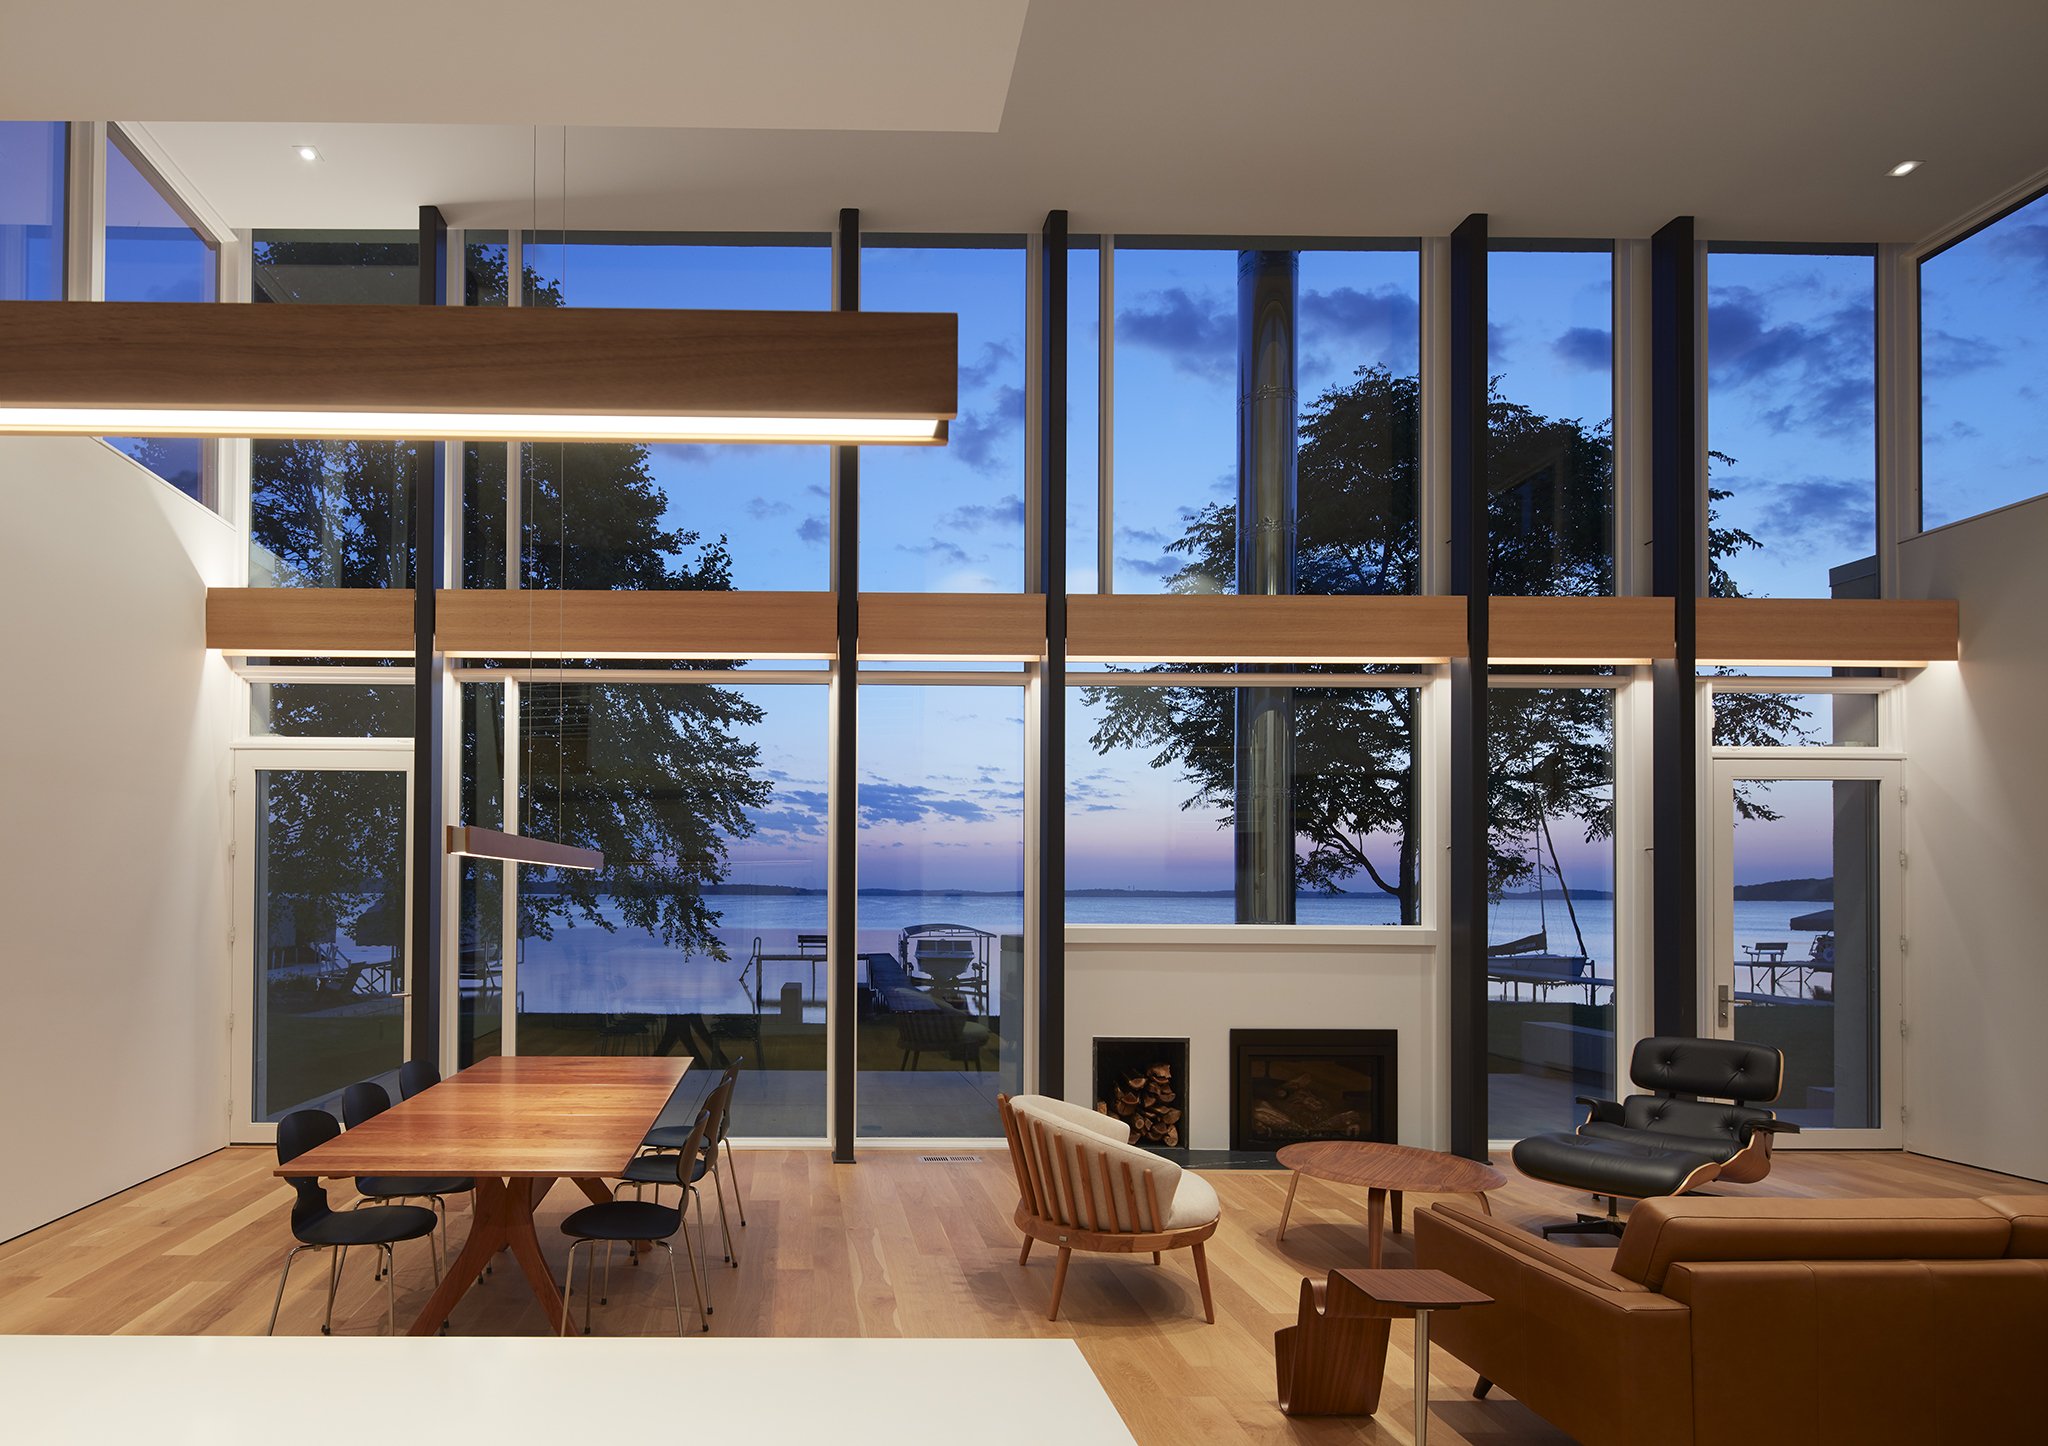  Spring Harbor House  N. Scott Johnson, XDEA Architects  Madison, WI     View Project  